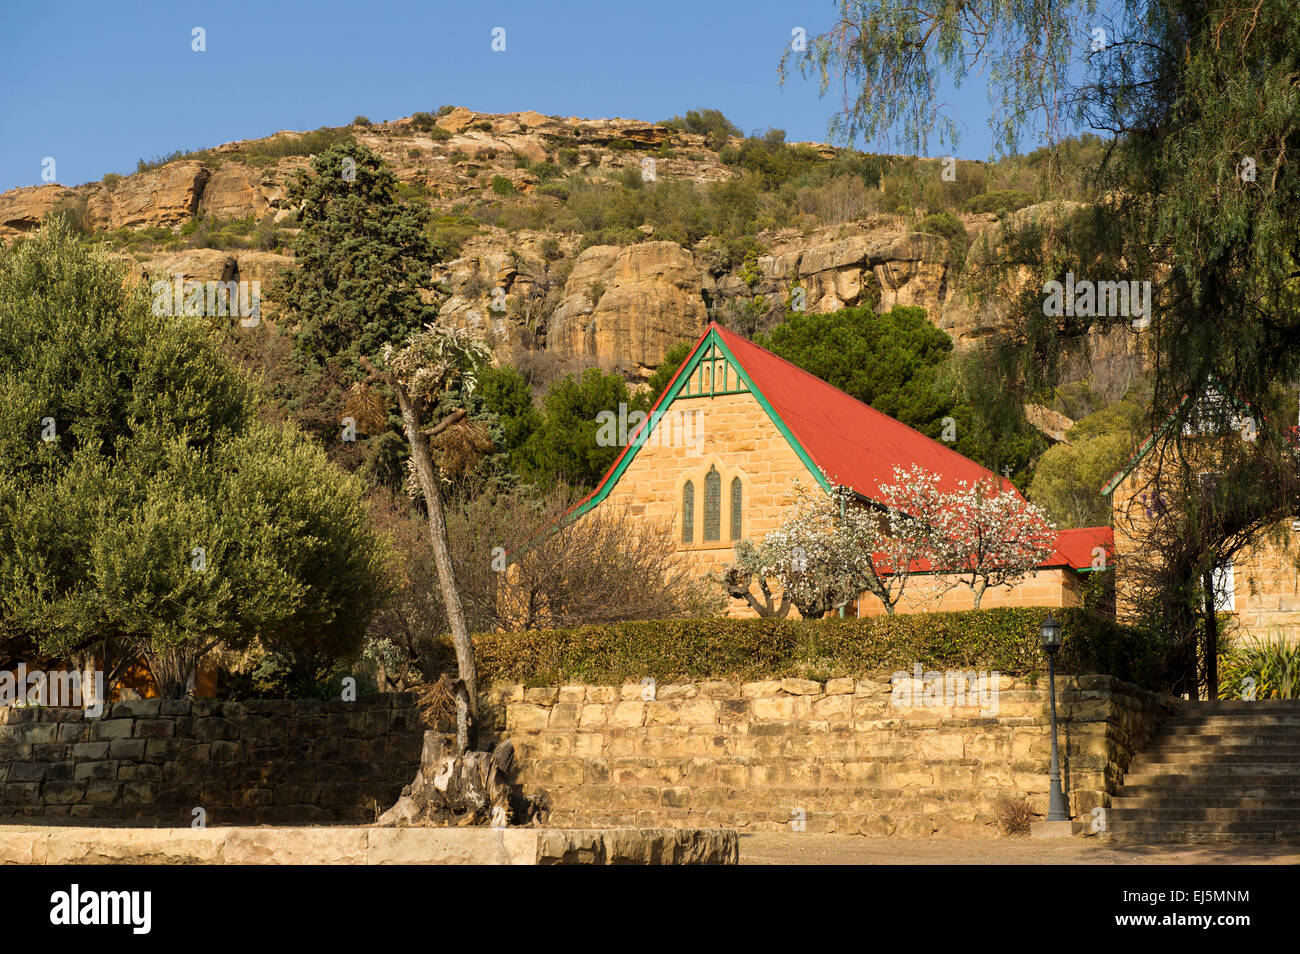 Sandstone buildings at Modderpoort Mission Station, Ladybrand, South Africa Stock Photo